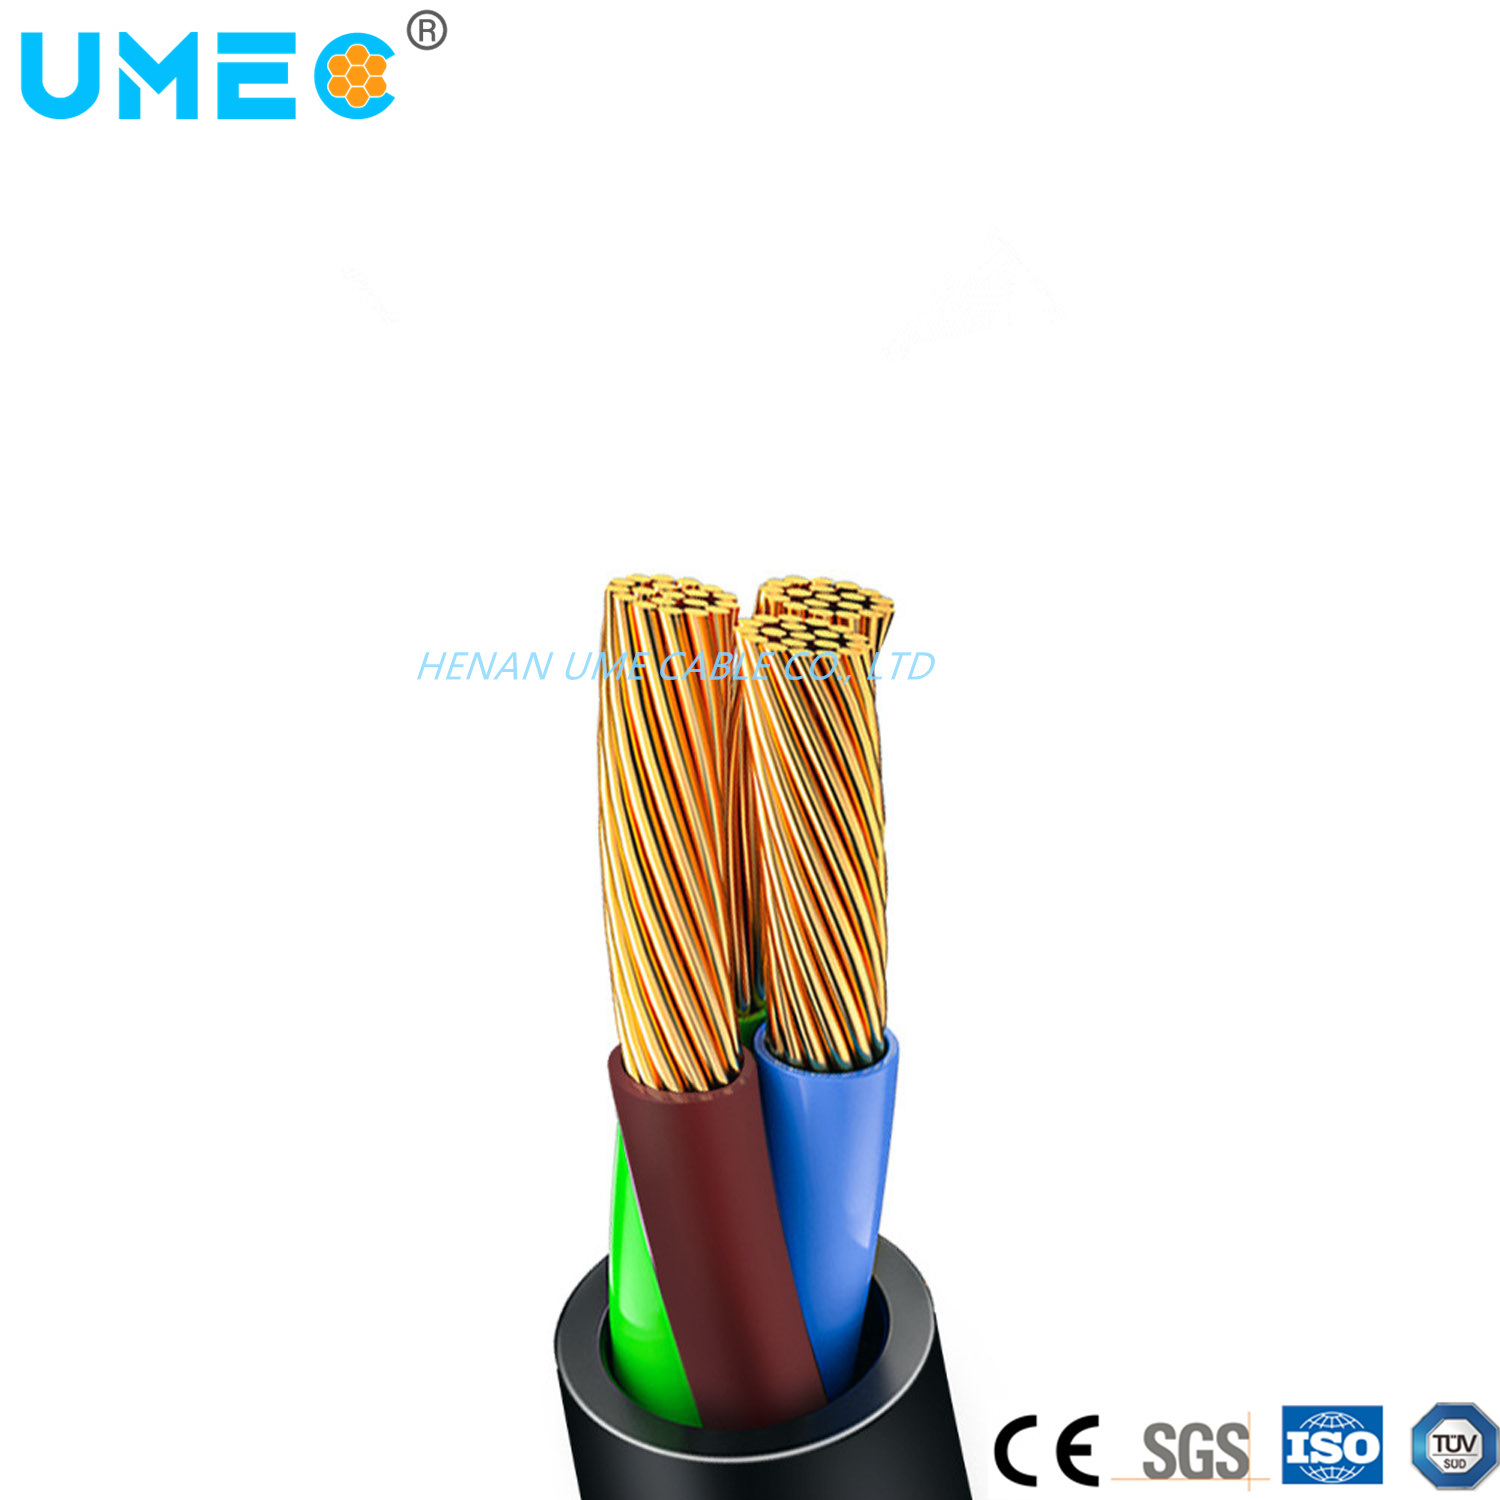 
                IEC 300/500V Rvv H05VV-F Flexible Copper Wire PVC Insulation Electrical Wire Cable
            